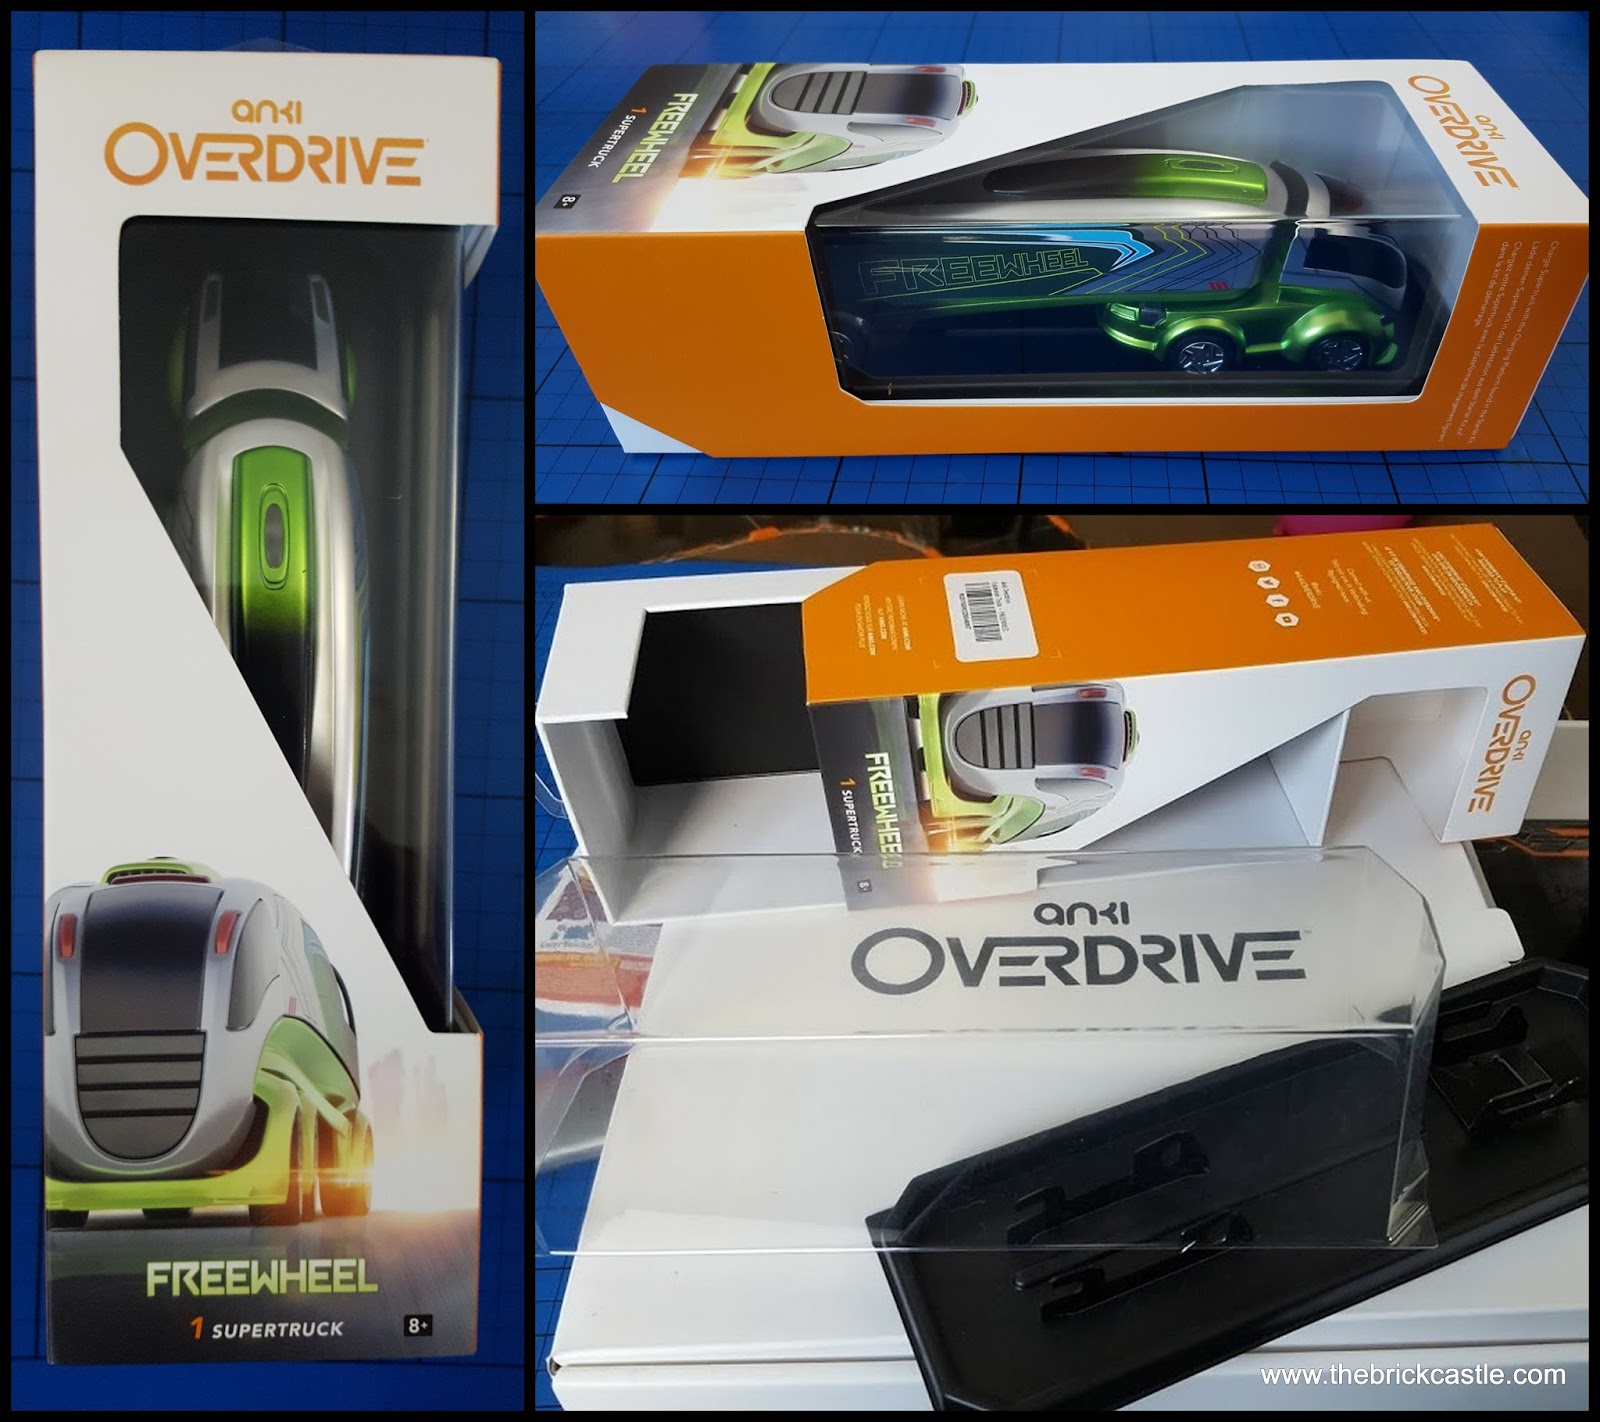 Anki Overdrive Freewheel Supertruck Sealed in box $59.99 New Green and Silver 